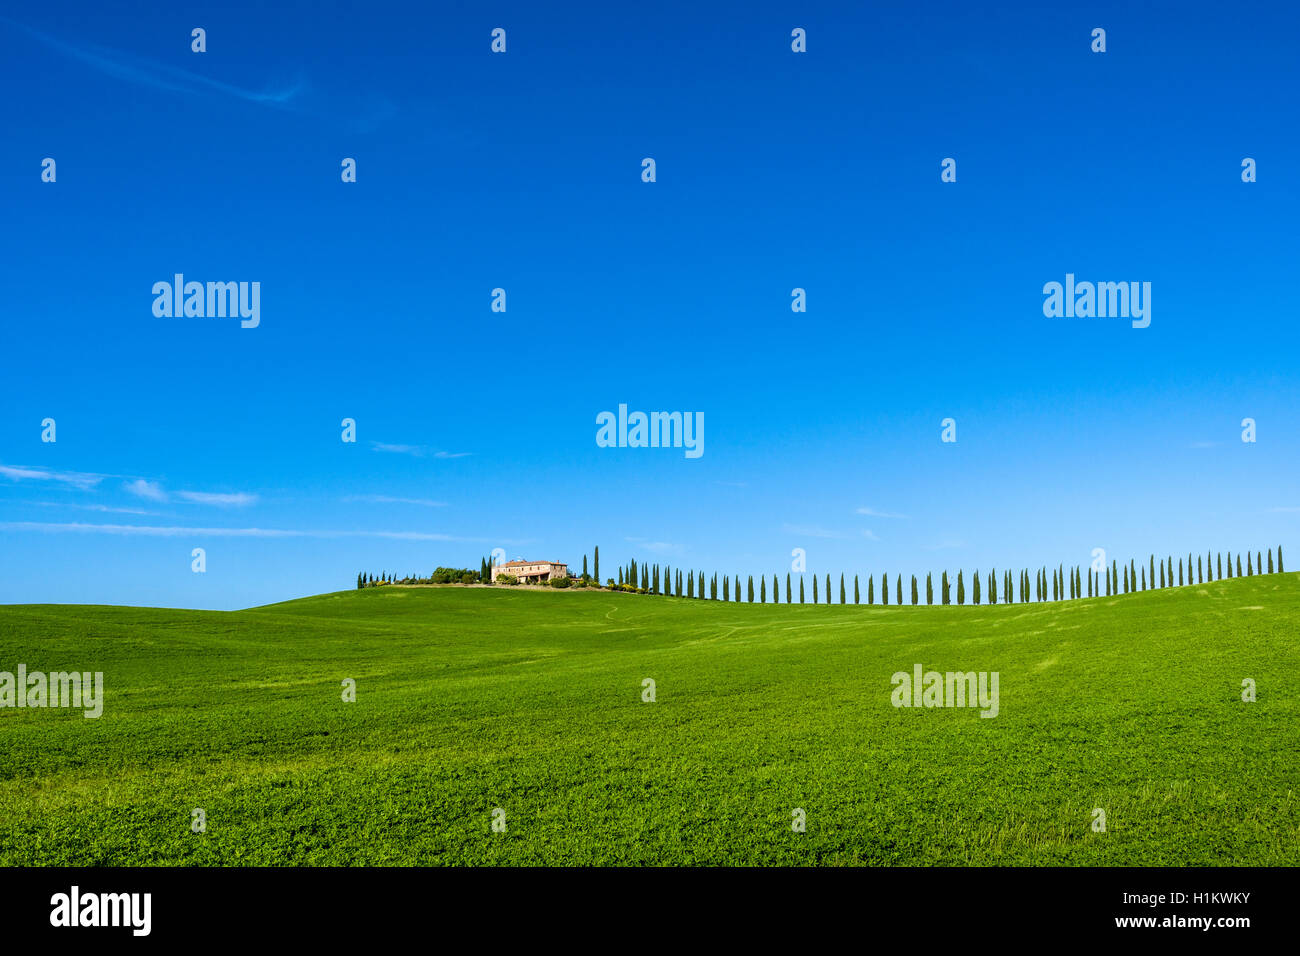 Typical green Tuscan landscape in Bagno Vignoni, Val d’Orcia, farm on hill, fields, cypresses and blue sky Stock Photo